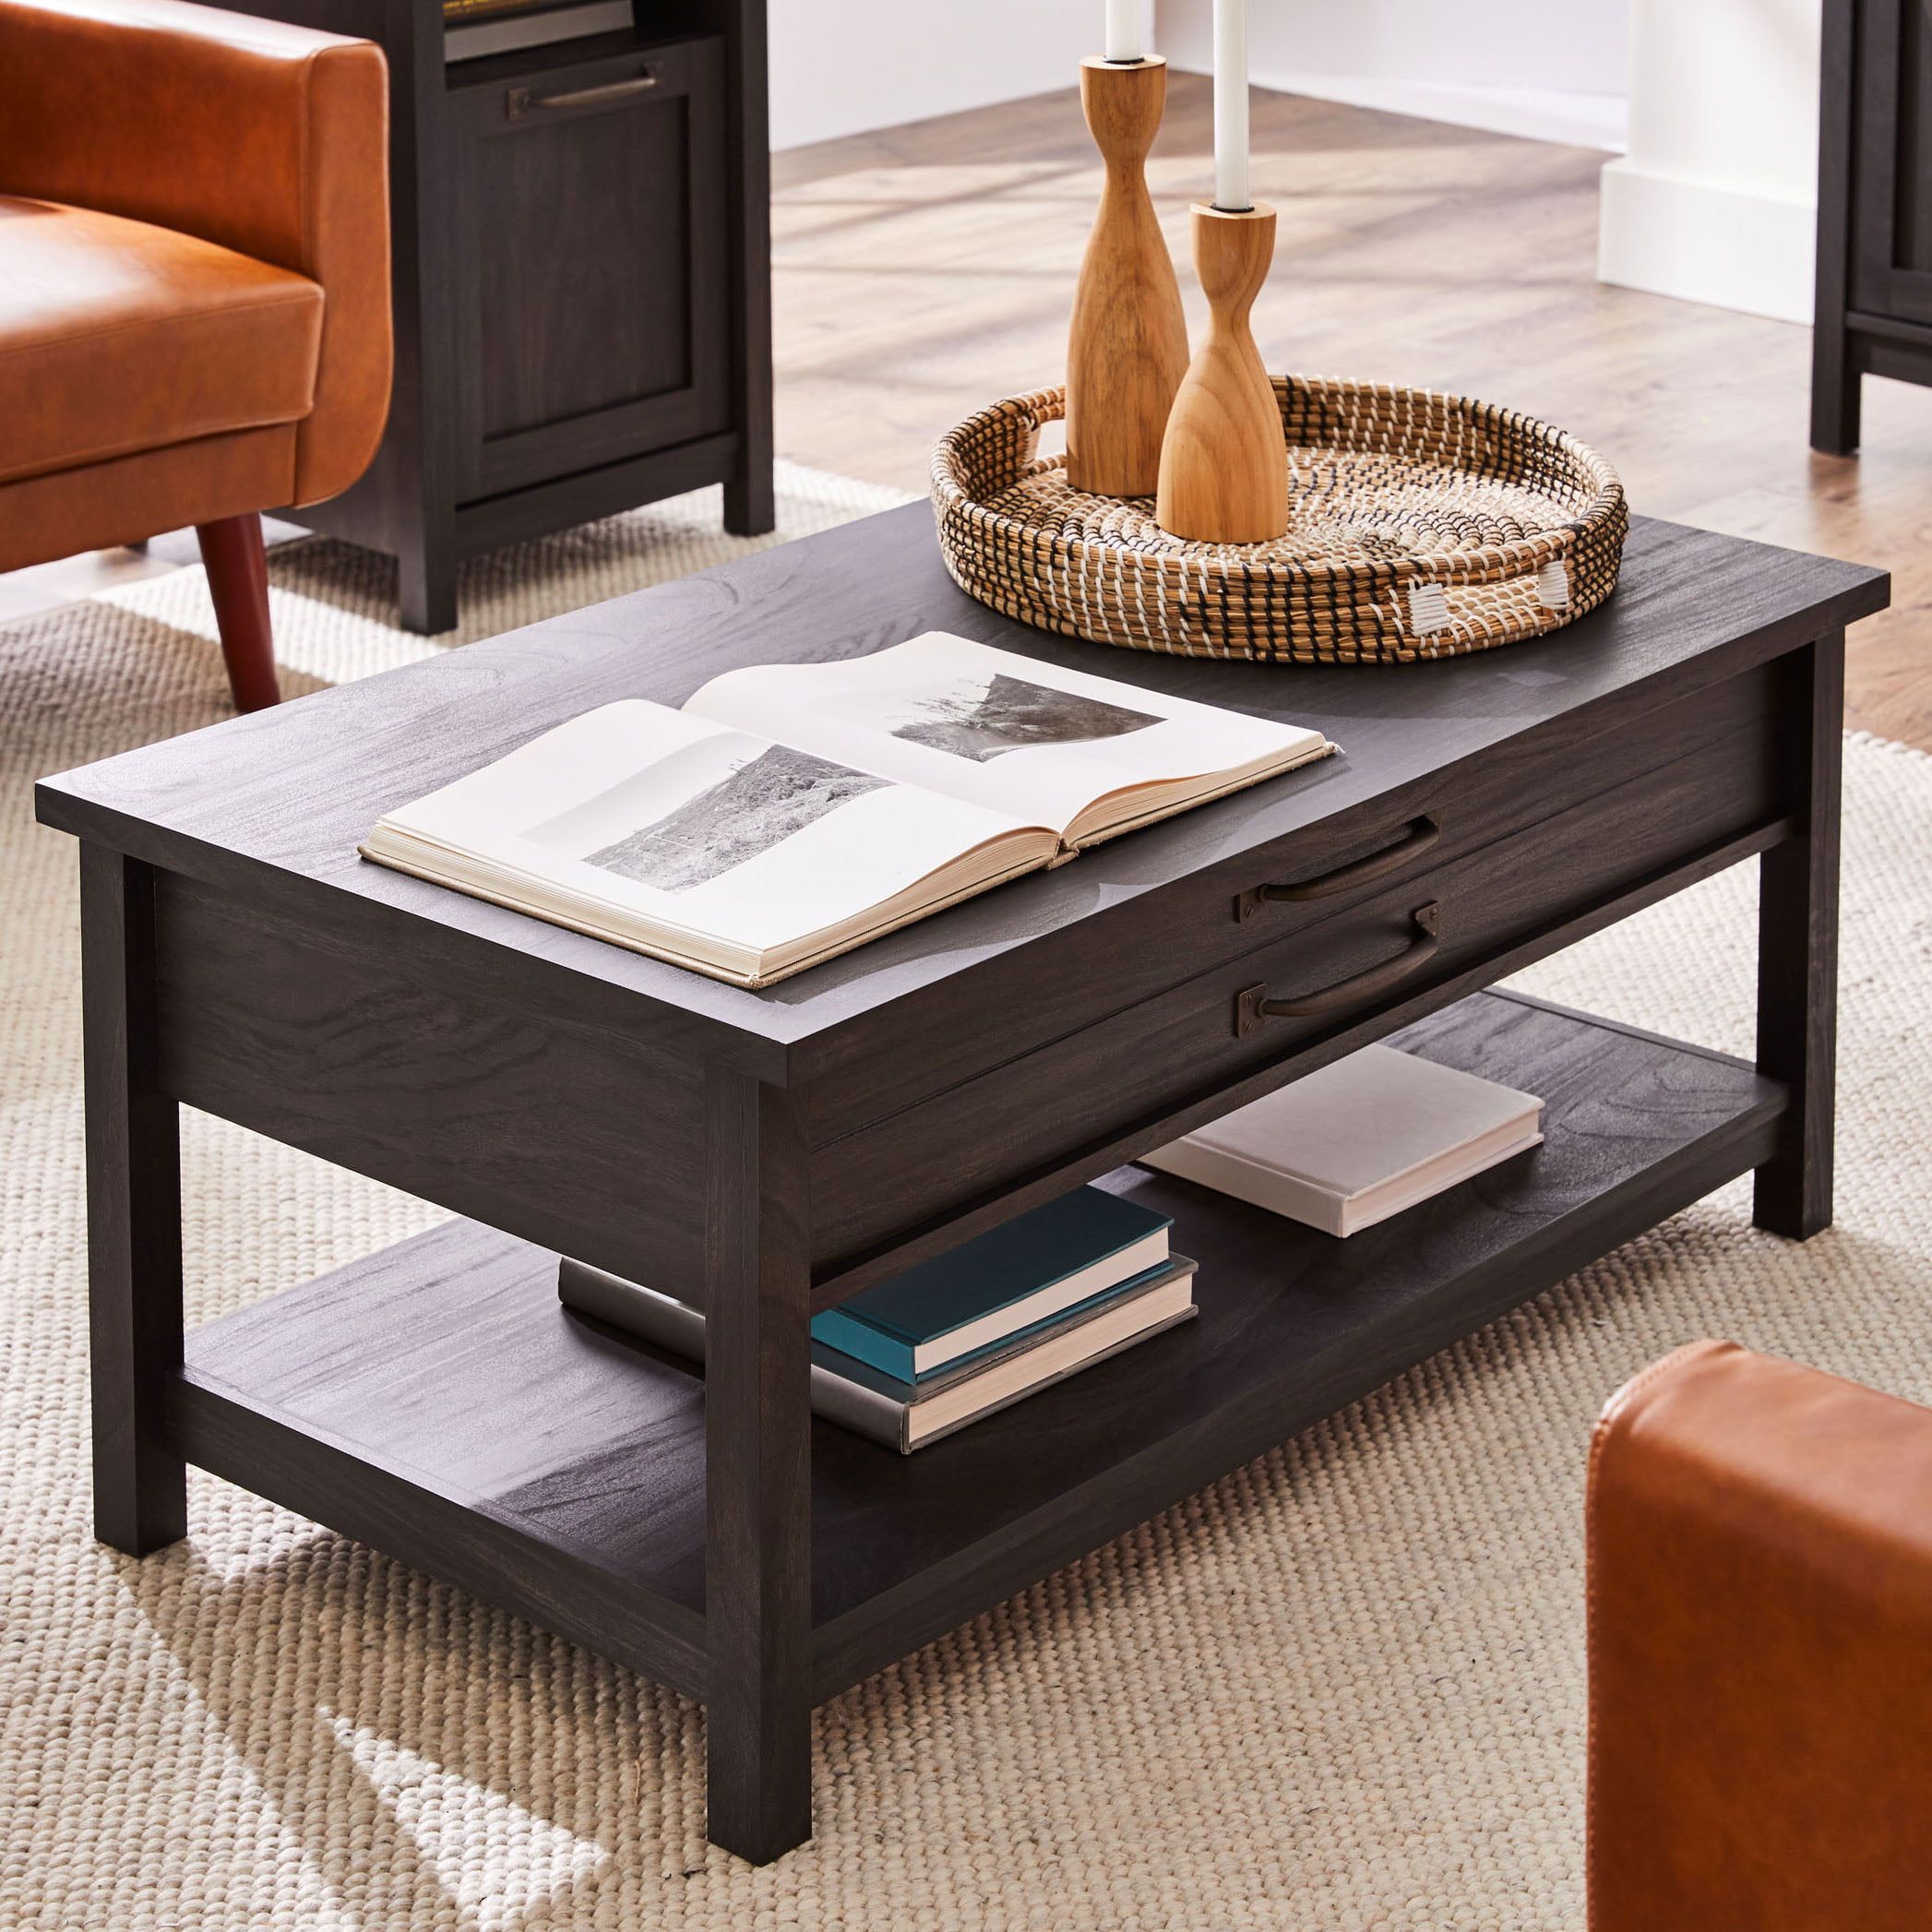 Better Homes & Gardens Modern Farmhouse Rectangle Lift Top Coffee Table,  Black Finish | Bigbigmart Throughout Farmhouse Lift Top Tables (View 13 of 15)